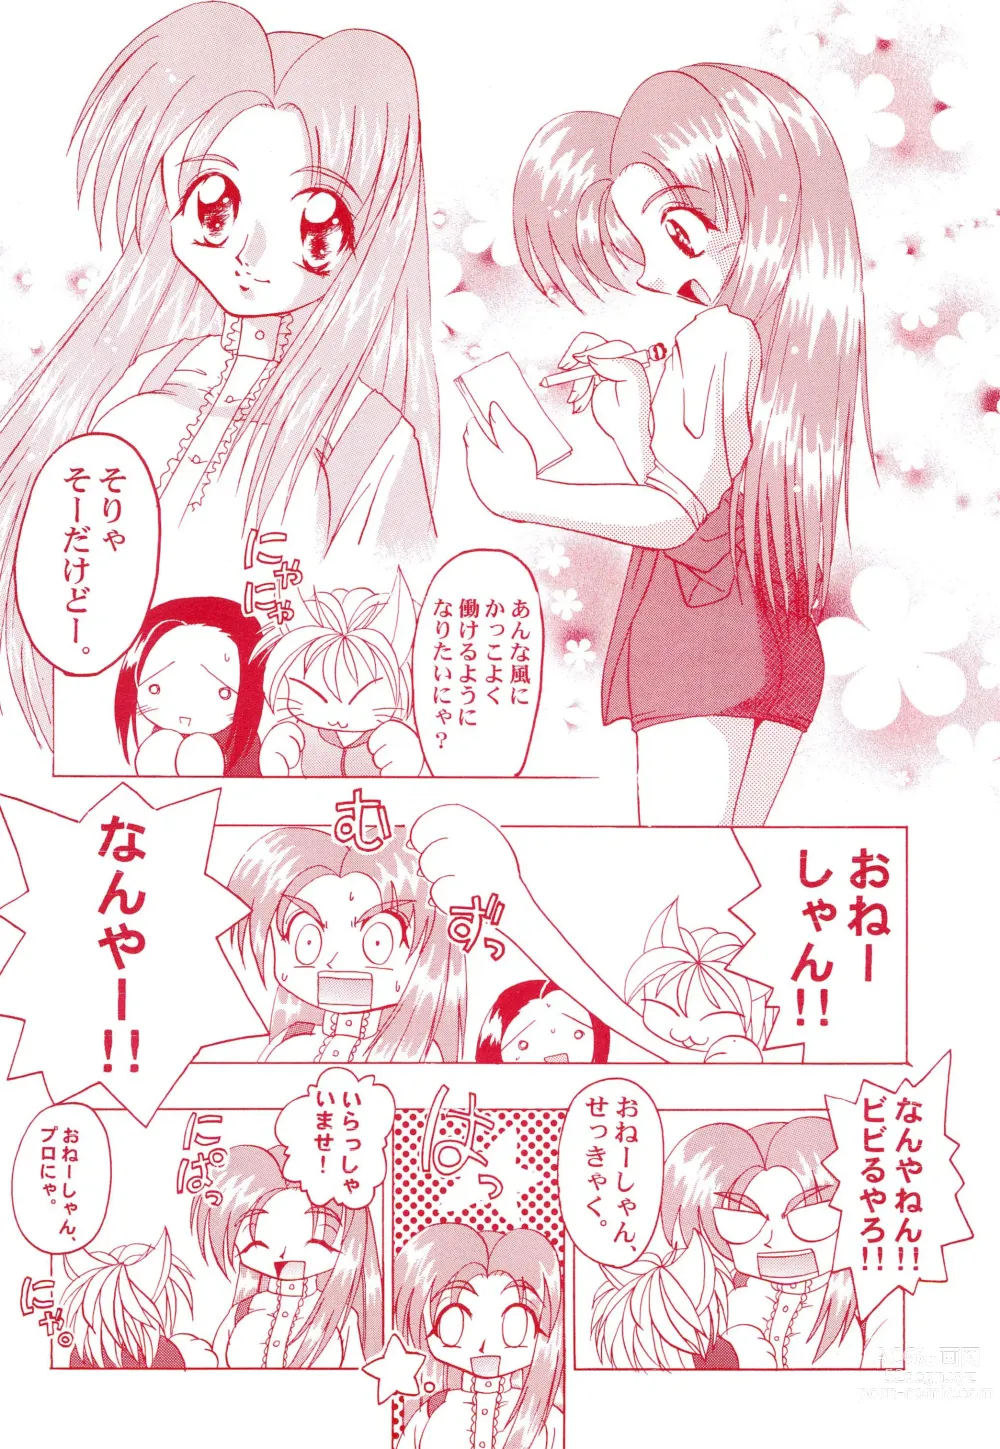 Page 12 of doujinshi Get Sweet ”A” Low Phone Anna Mirrors ORIGINAL STORY